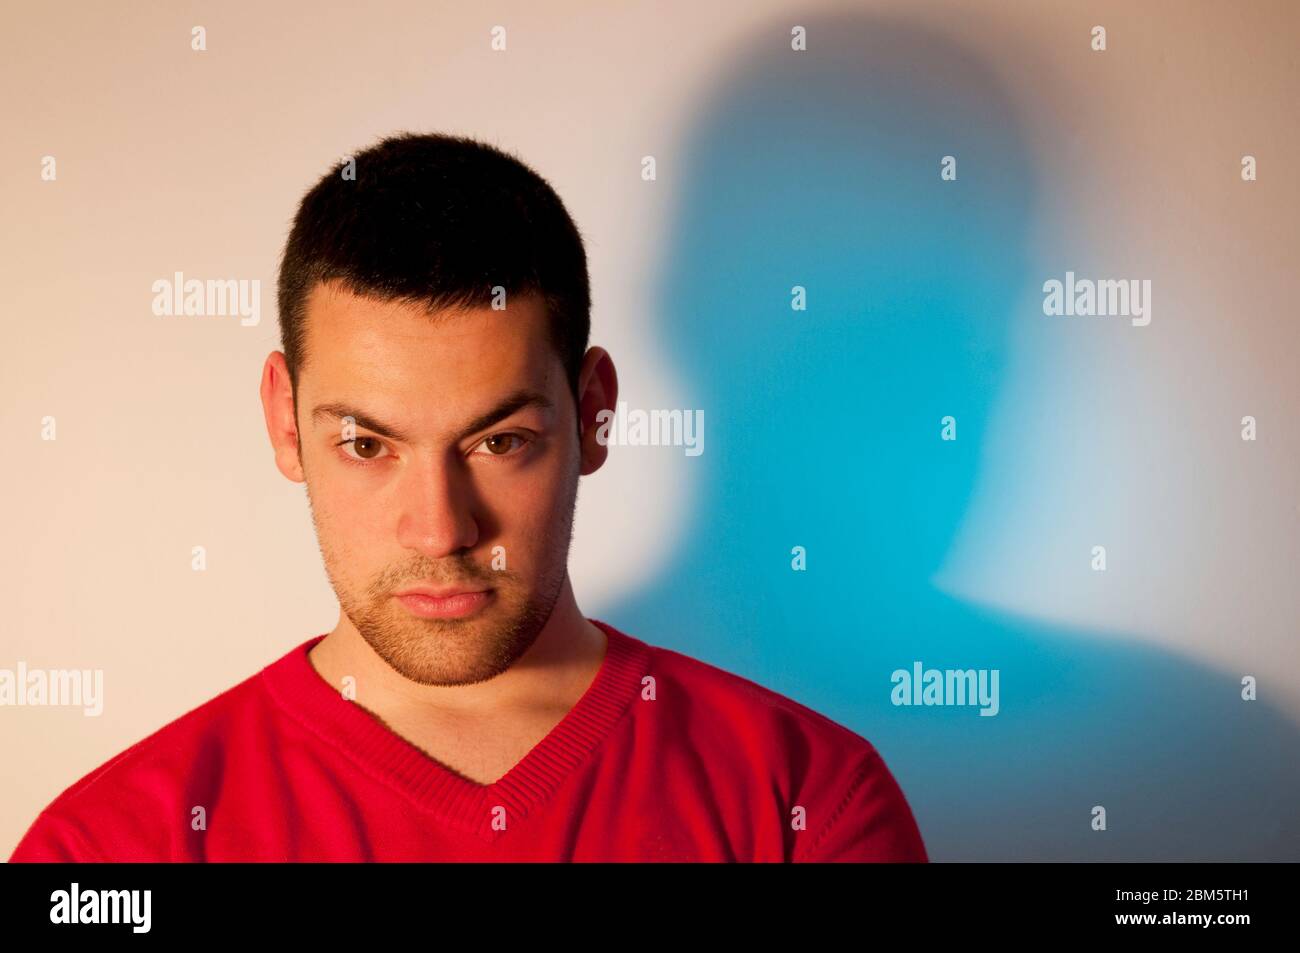 Young man, wearing red sweater, looking at the camera. Stock Photo